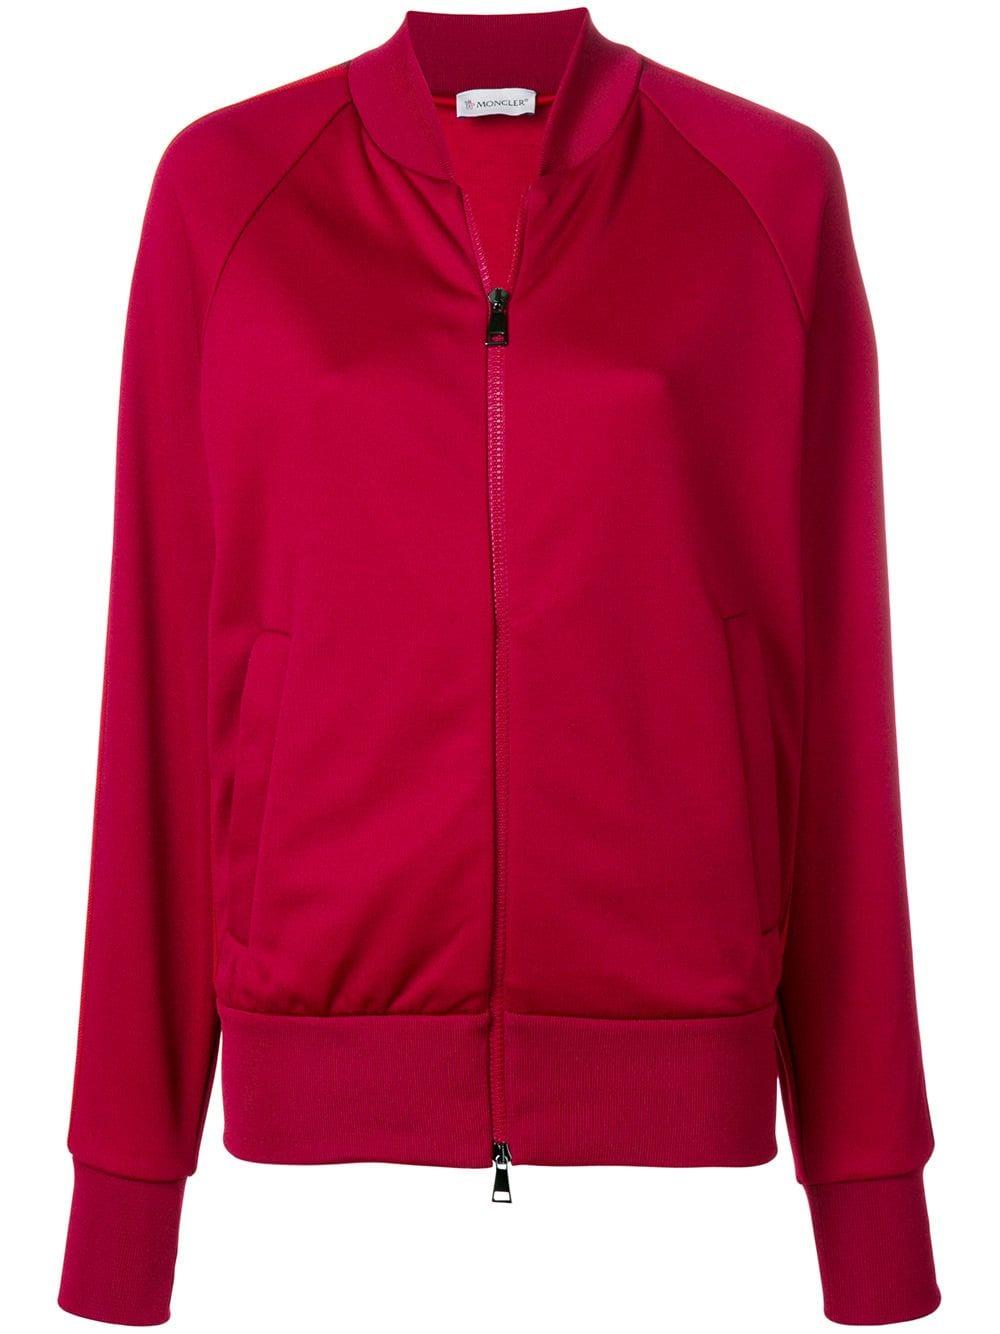 Moncler Cotton Side Stripe Bomber Jacket in Red - Lyst